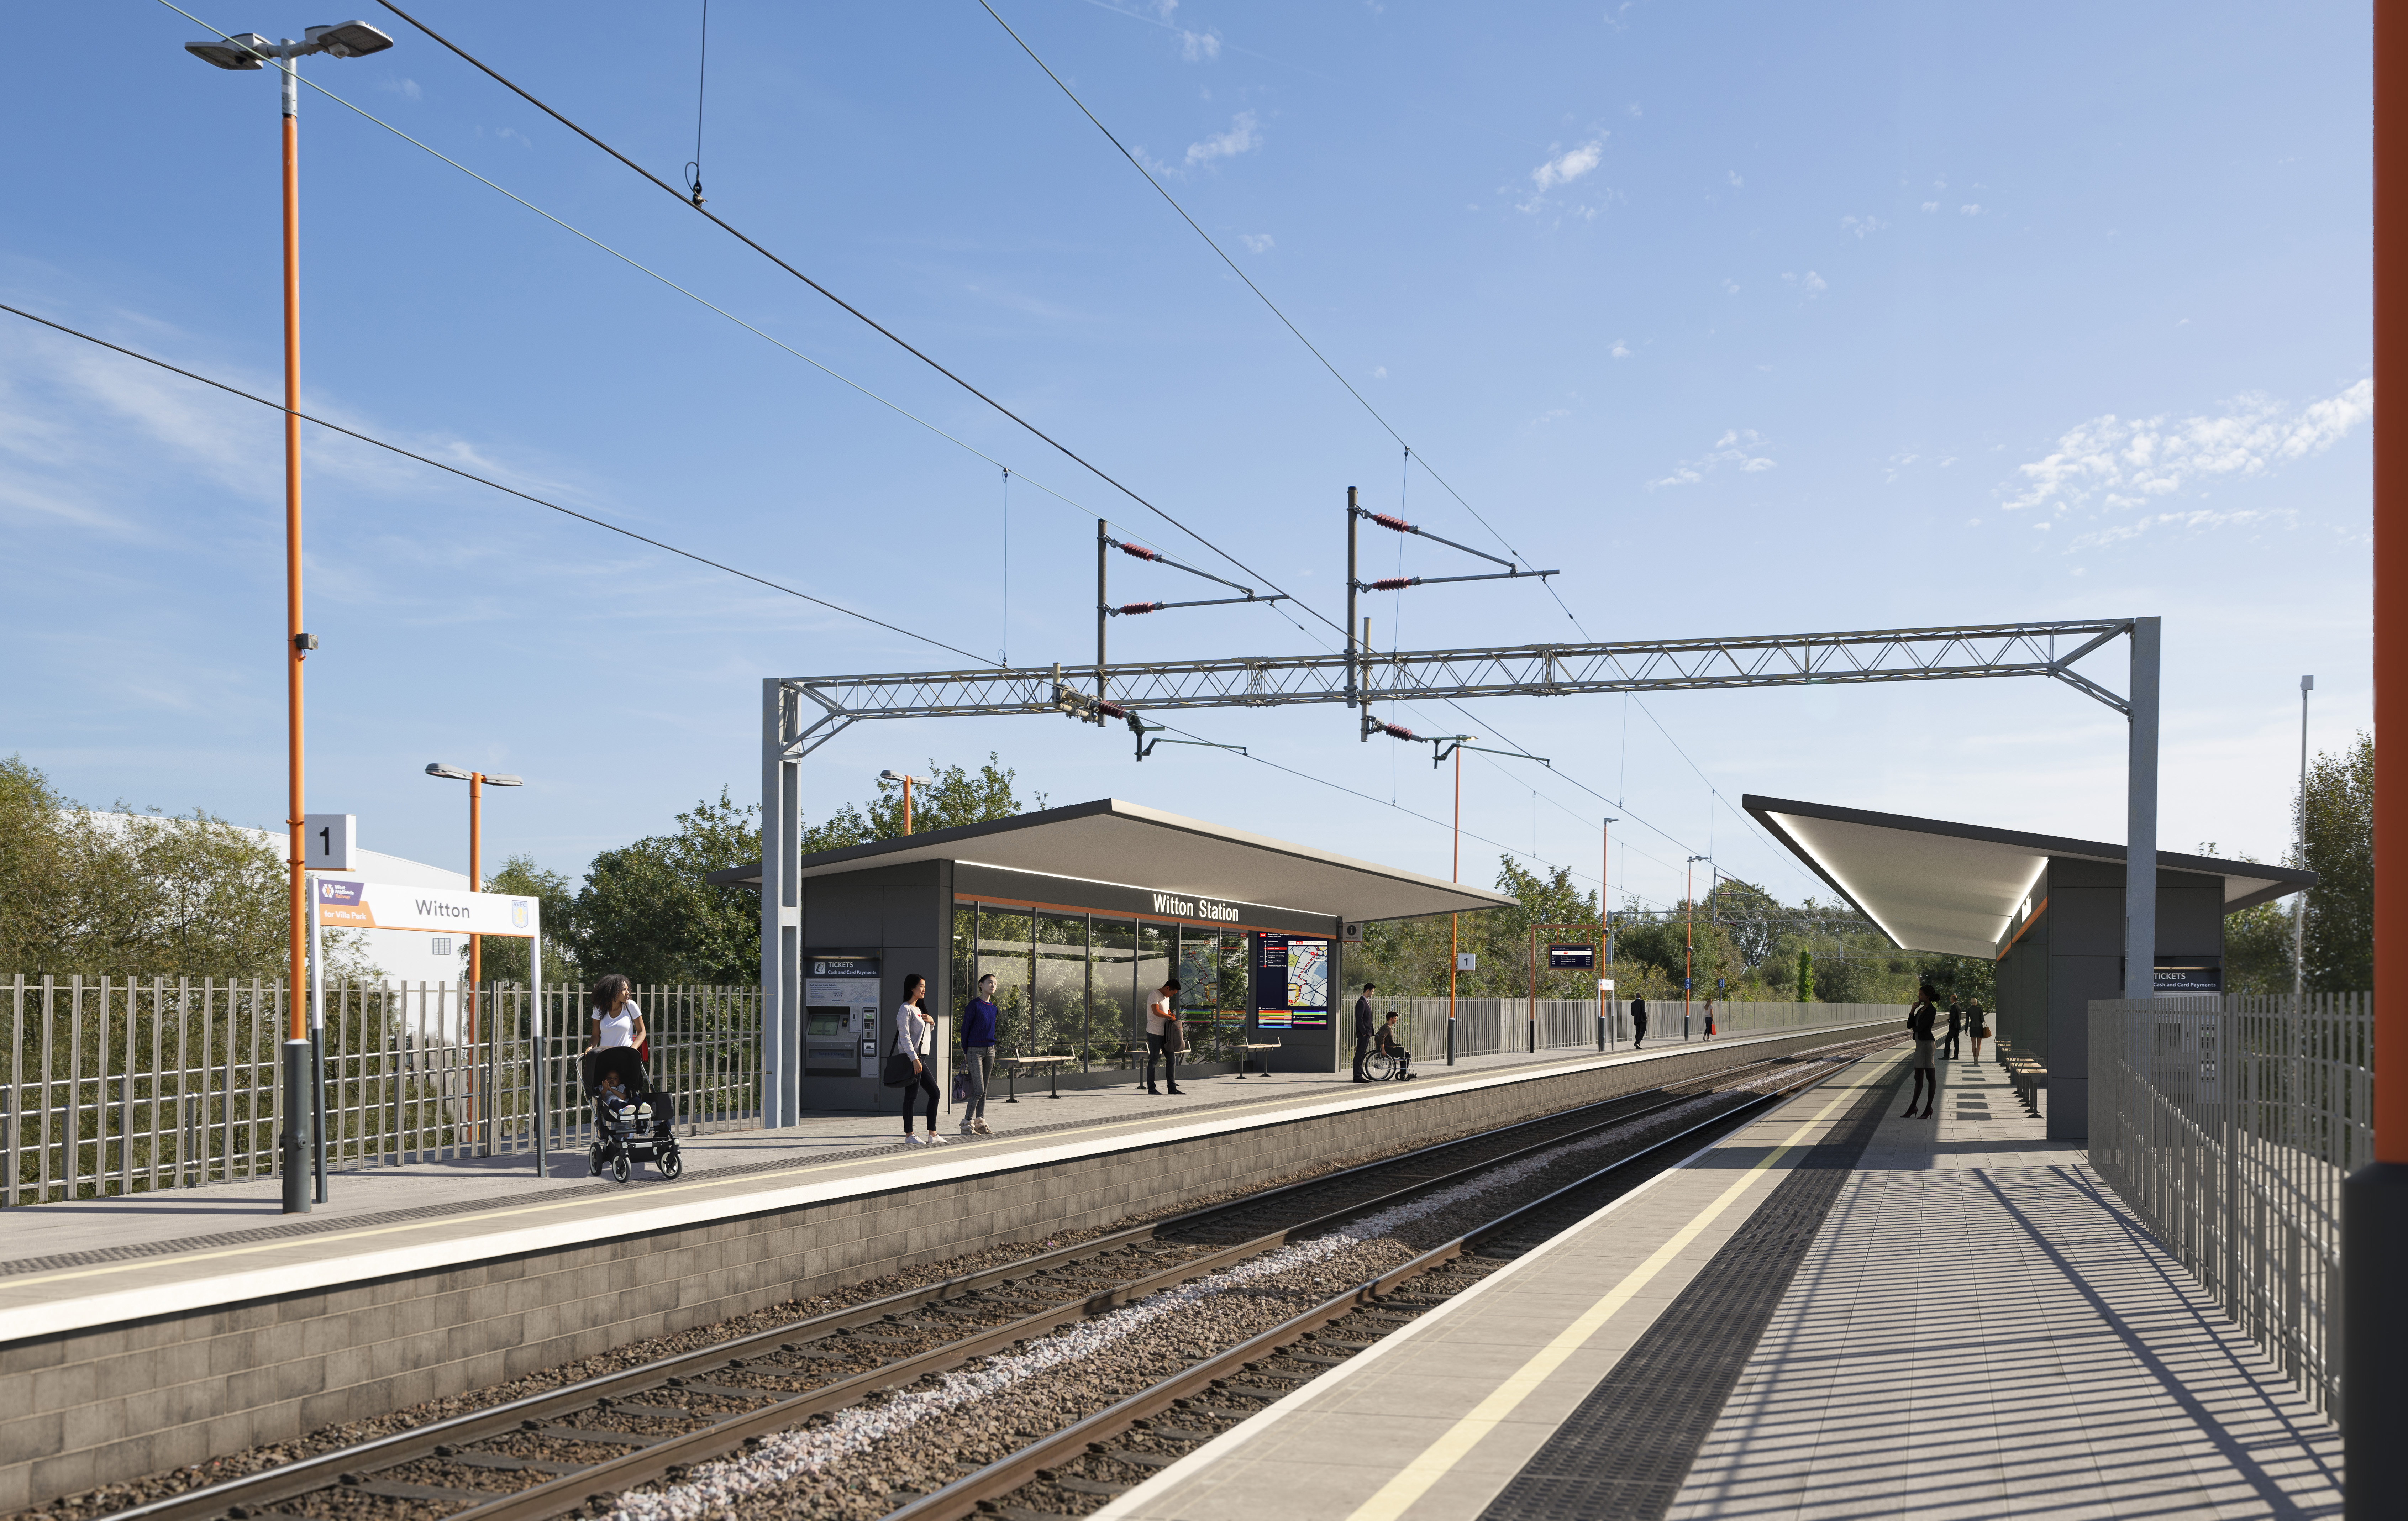 Designs for the new platform at Witton station.